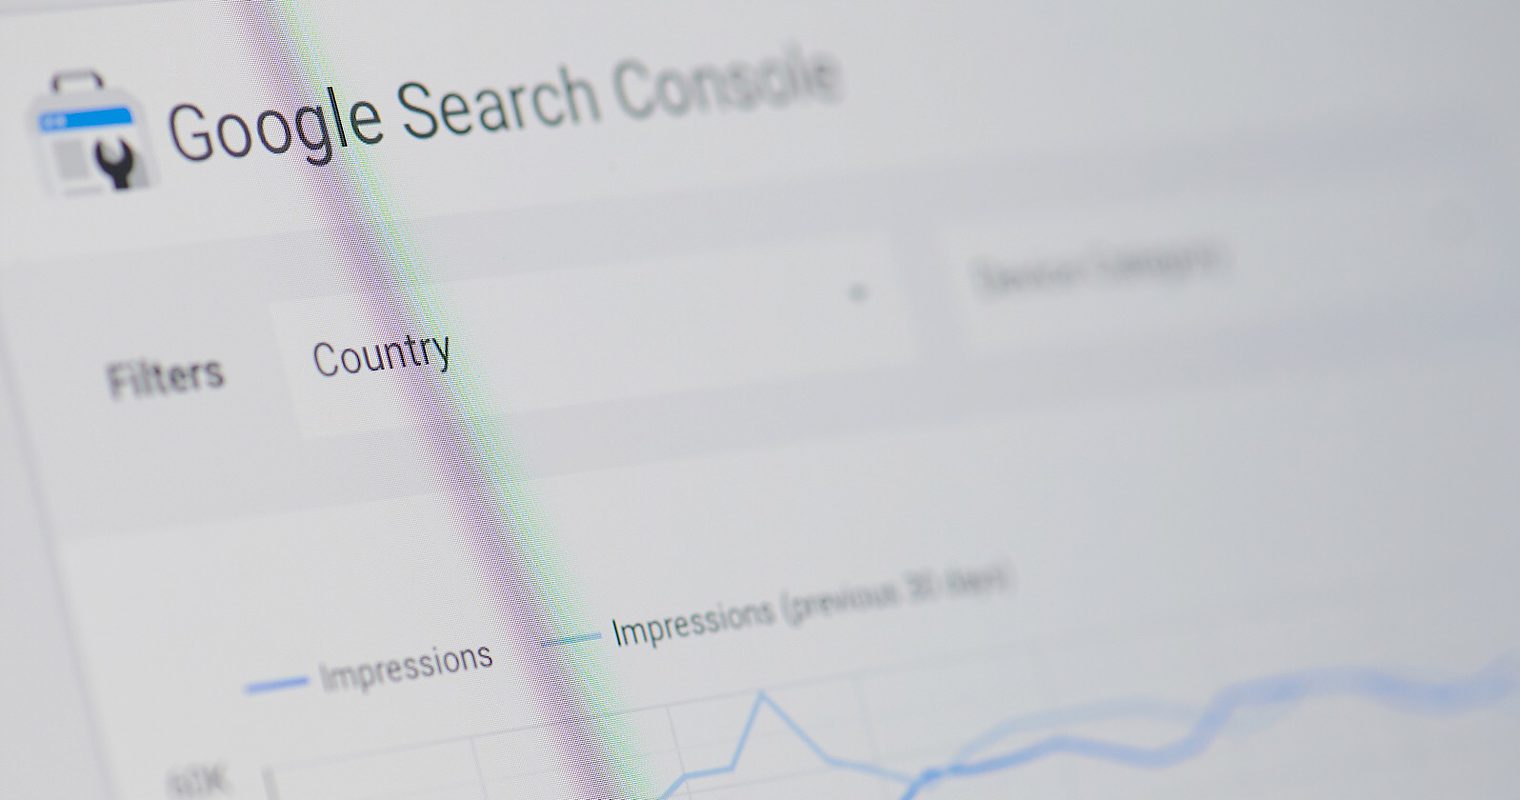 google search console shows new image